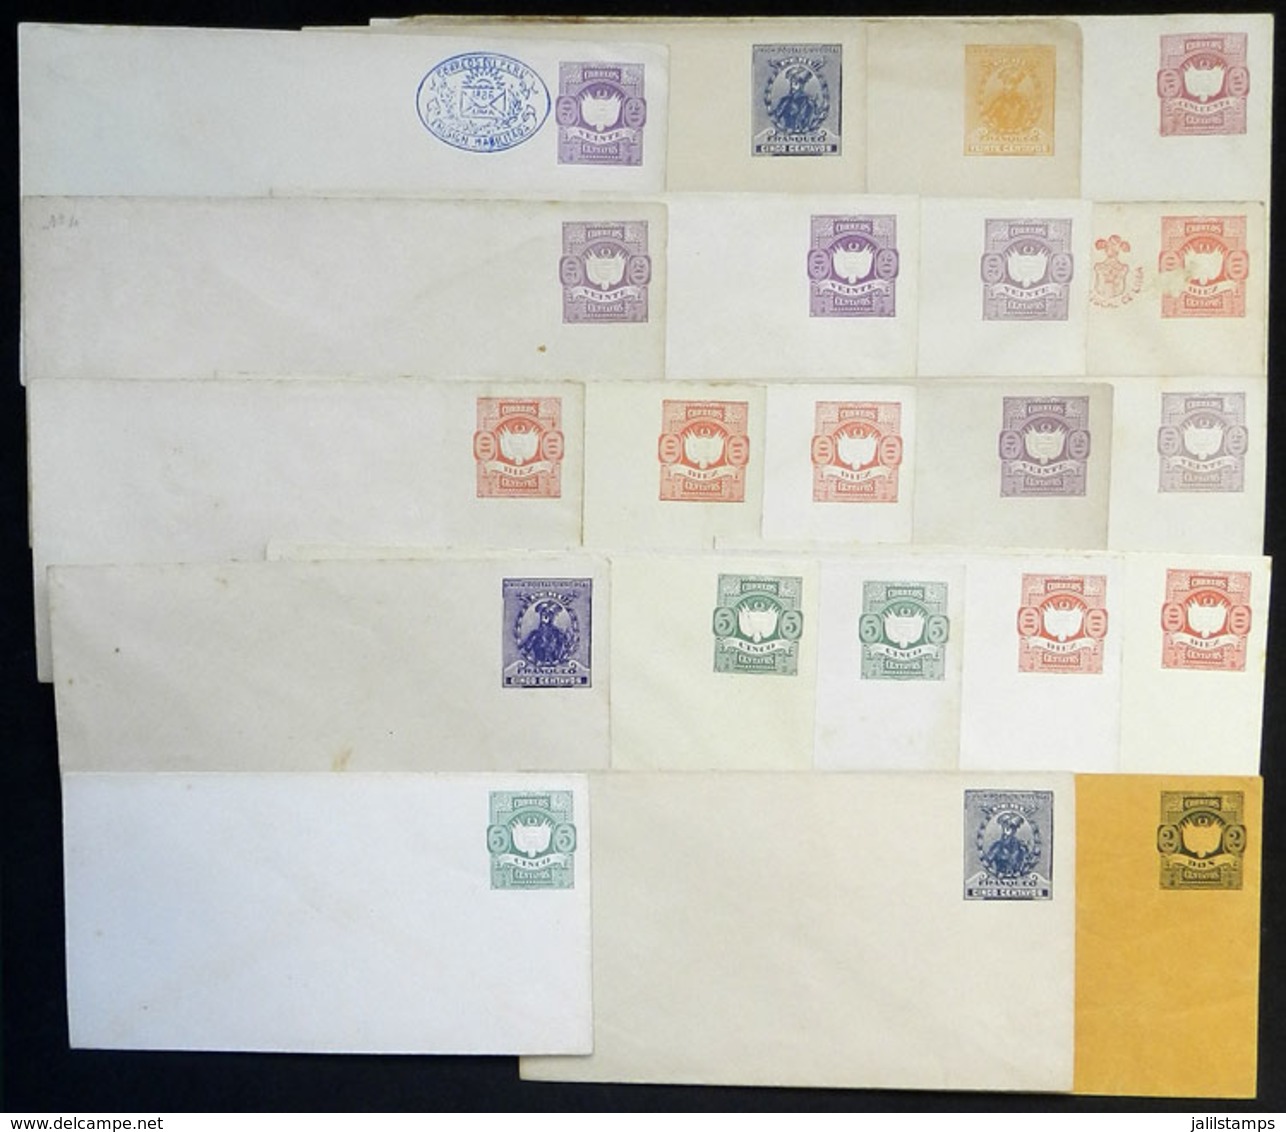 PERU: 21 Old Stationery Envelopes, Fine To Very Fine General Quality (a Couple With Minor Defect), Interesting! - Peru